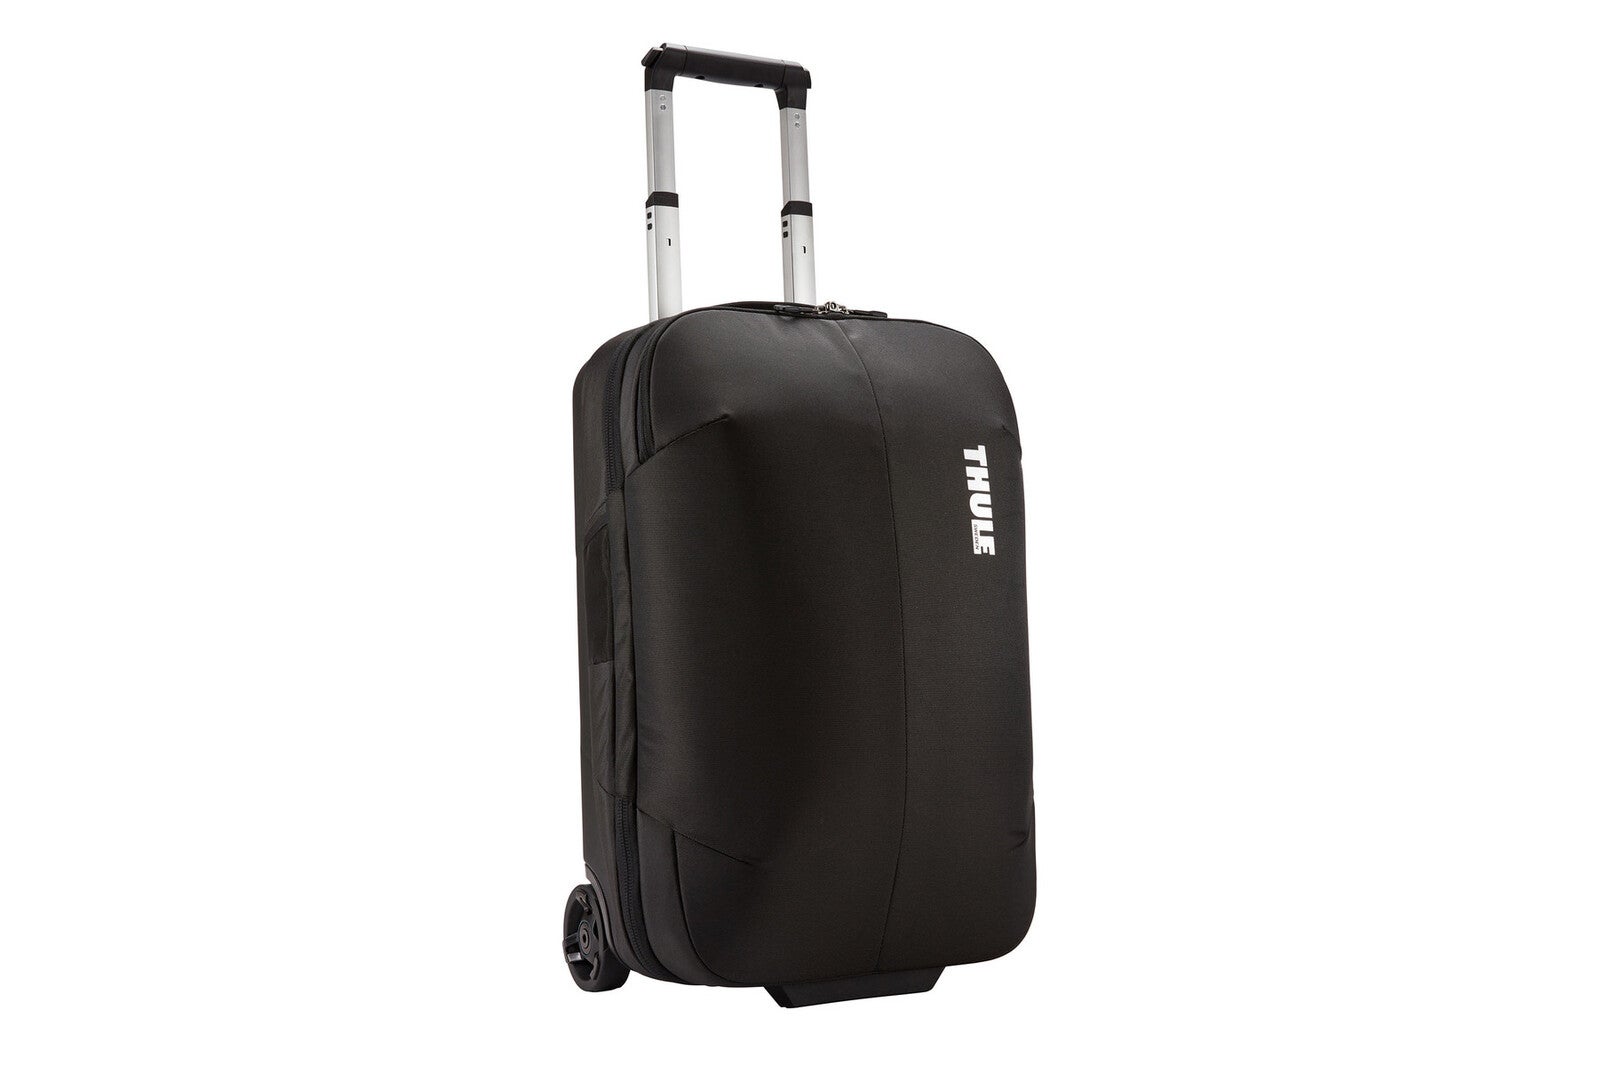 Thule Subterra 36L/55cm Rolling Carry On Travel Luggage Suitcase Wheeled Bag BLK